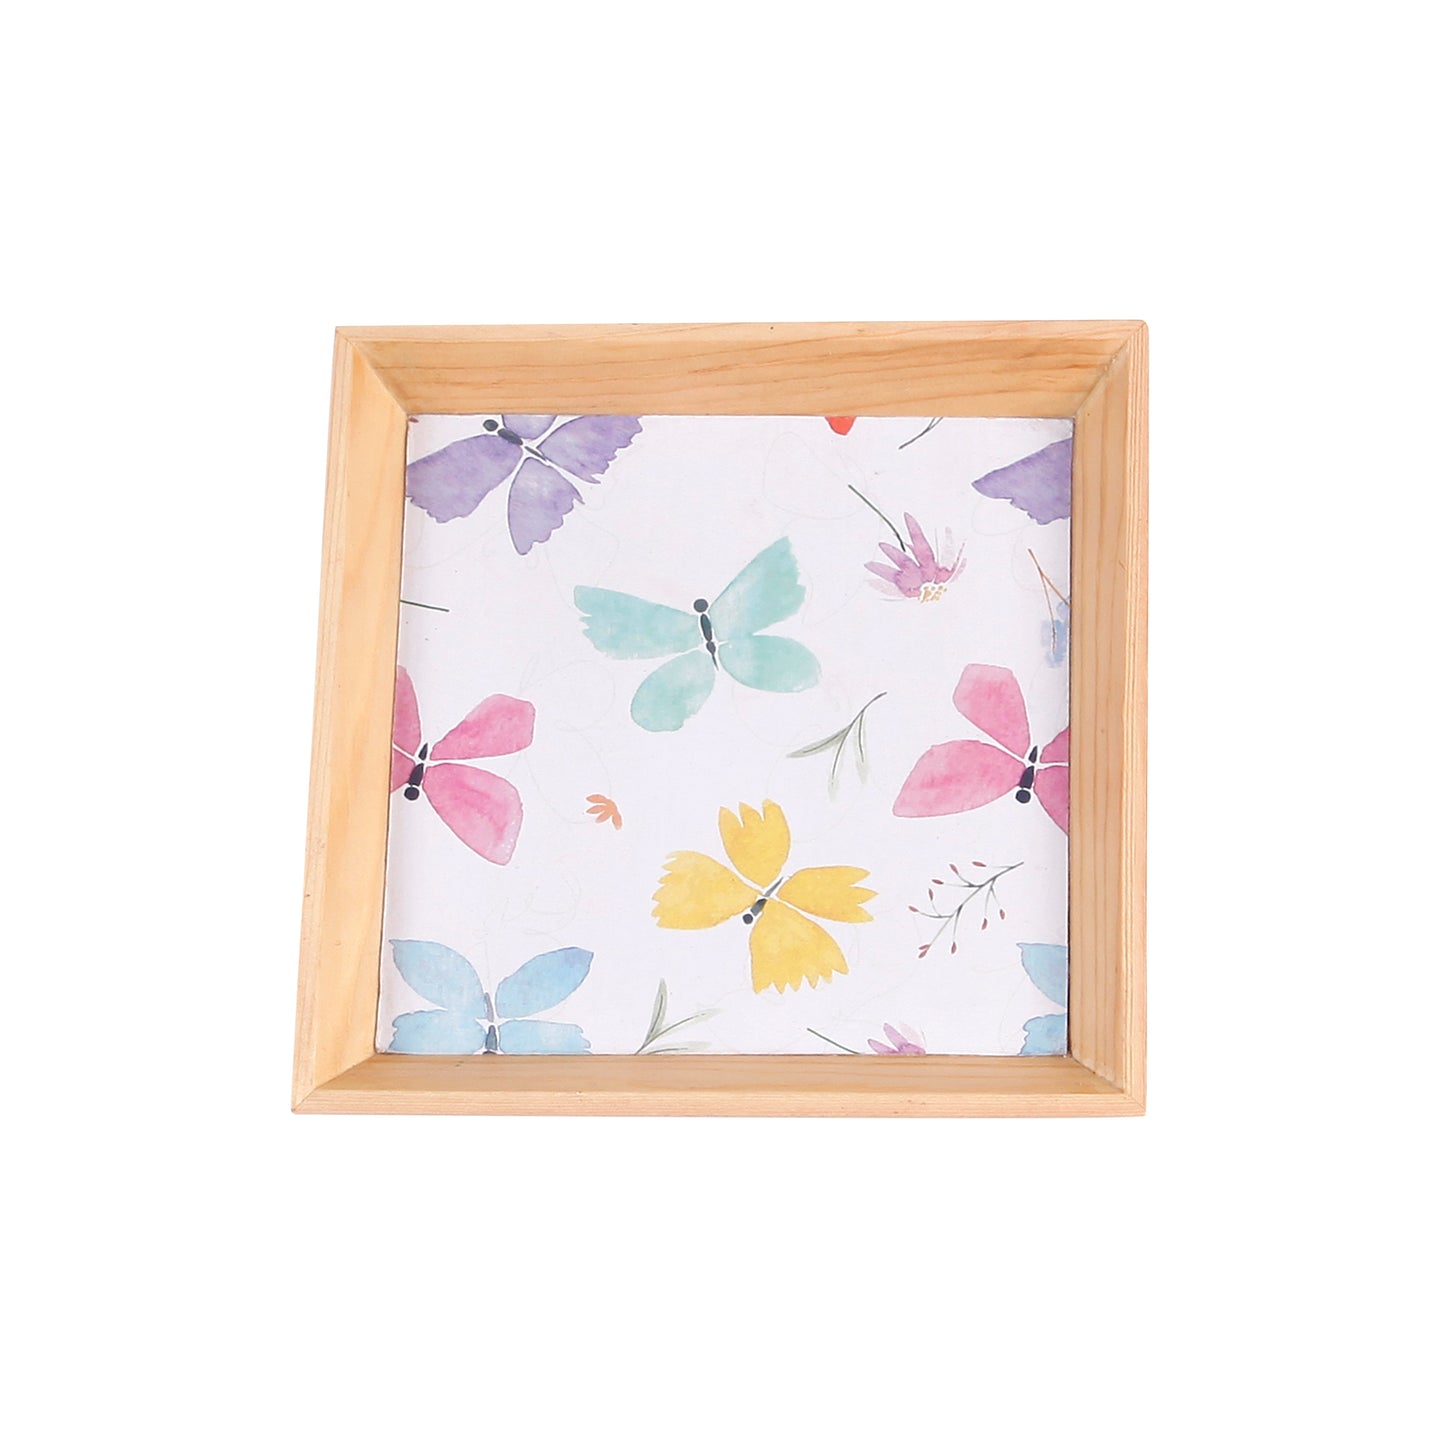 A Tiny Mistake Butterflies Small Square Wooden Serving Tray, 18 x 18 x 2 cm